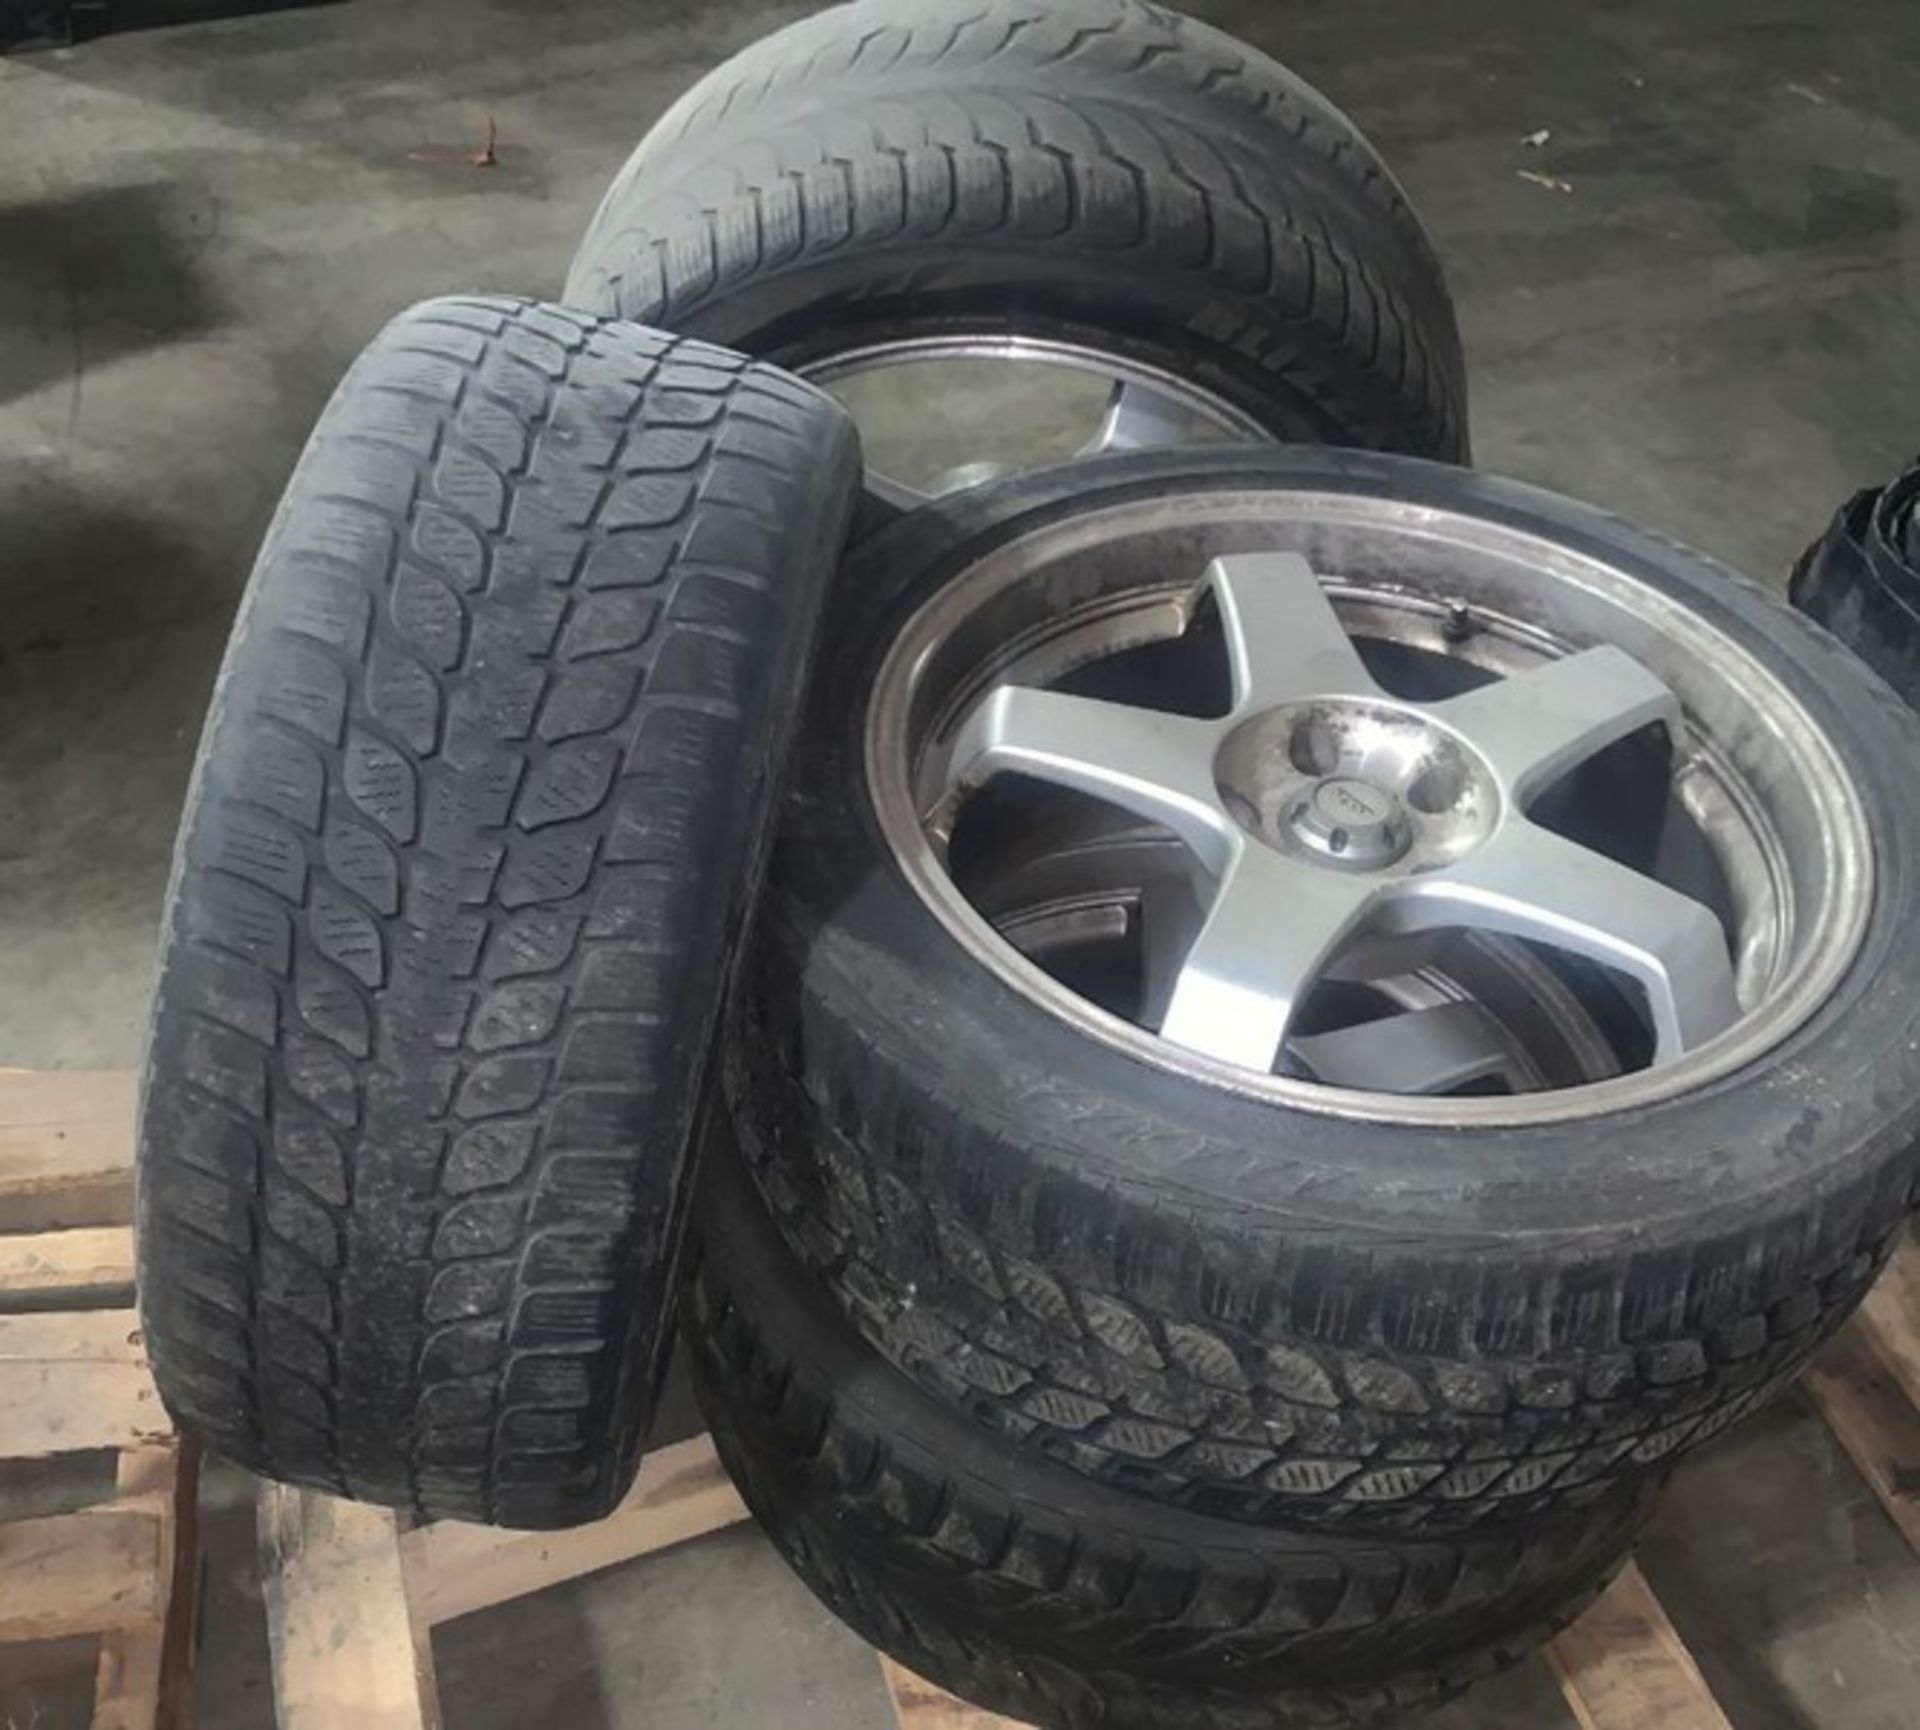 Set of four BLIZZAK tires on rim. Were used on a BMW 750Li (LOCATED IN IOWA, RIGGING INCLUDED WITH